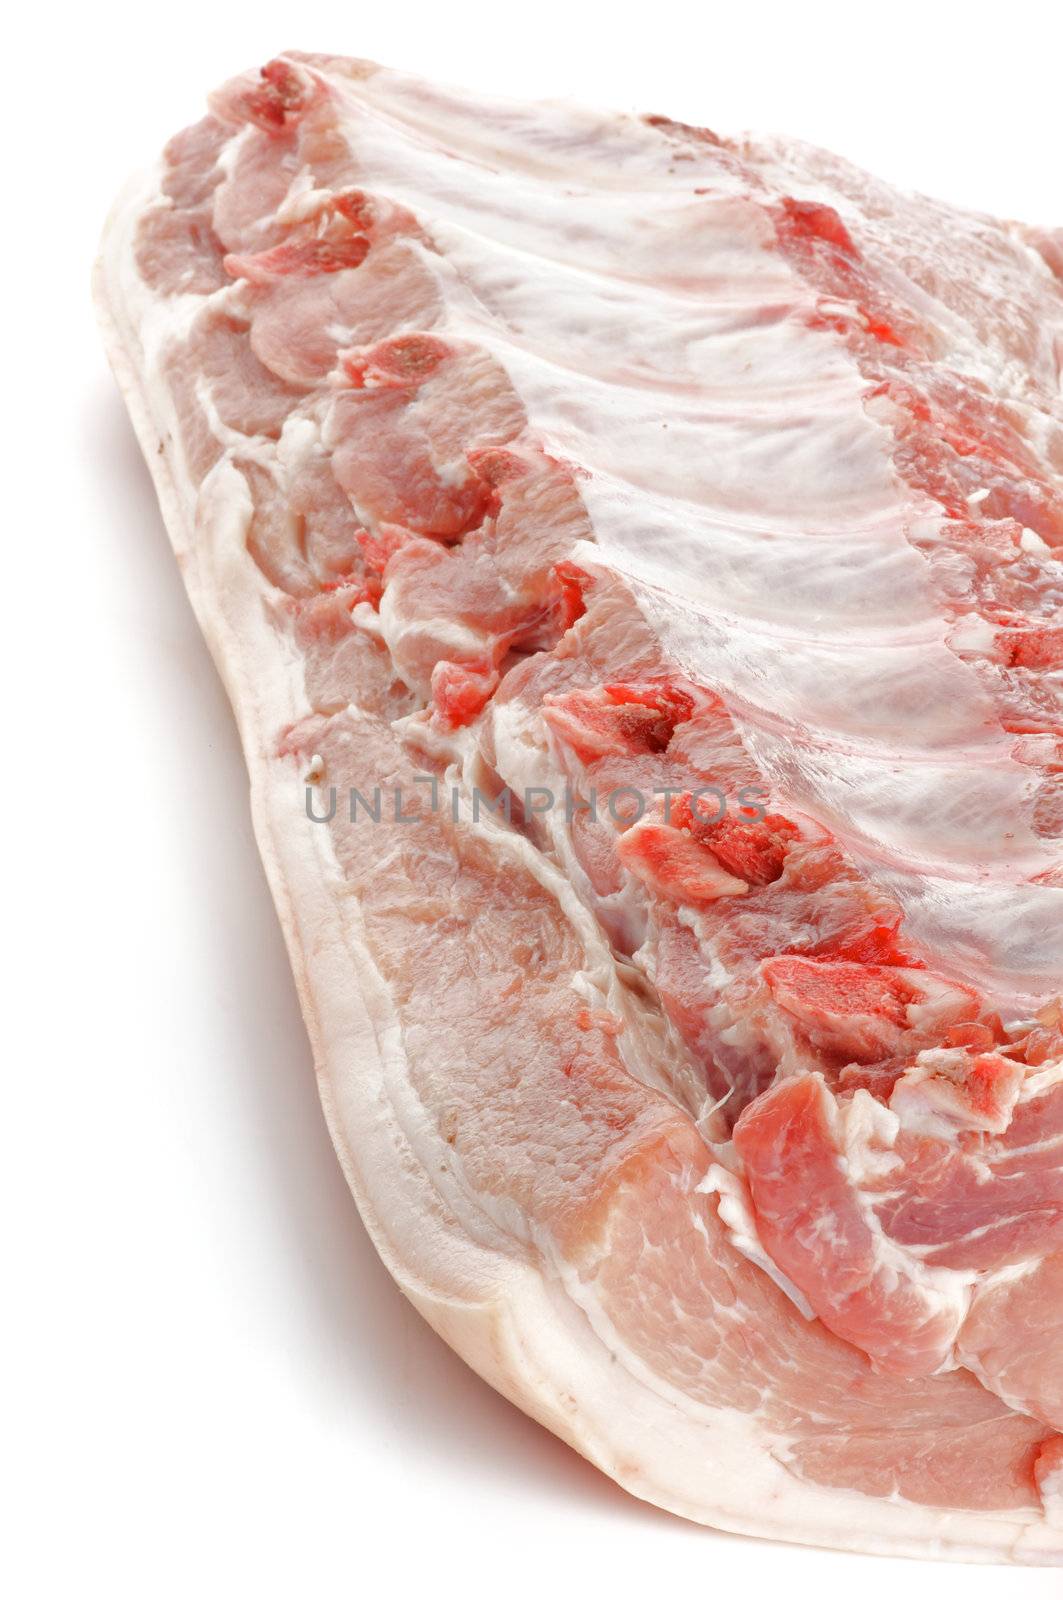 Perfect Big Raw Pork Chop with Ribs closeup on white background